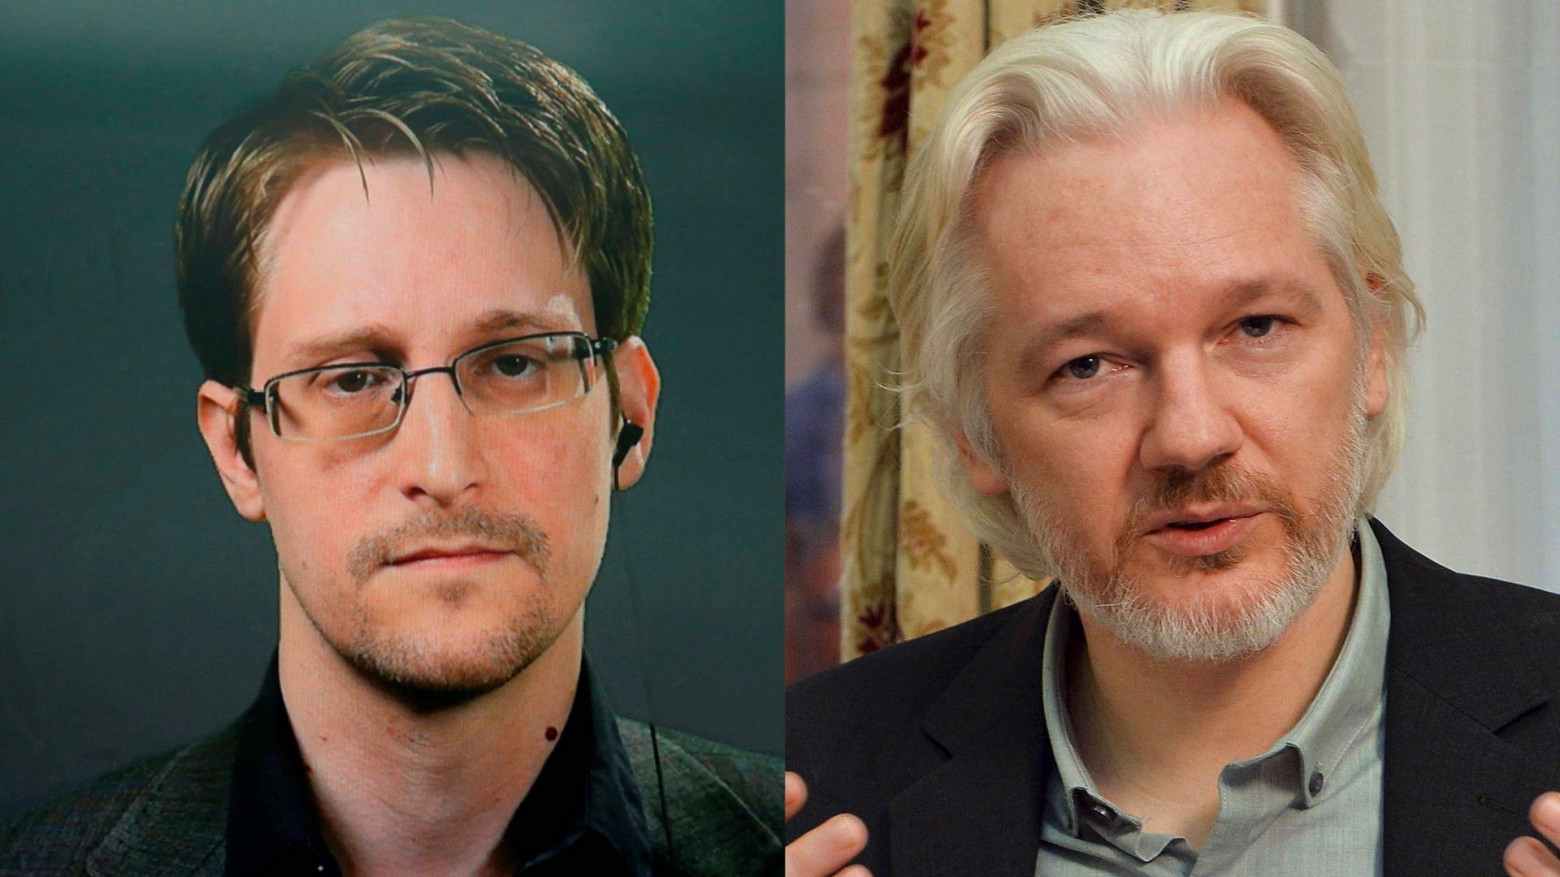 Musk launches Twitter poll to pardon Assange and Snowden book